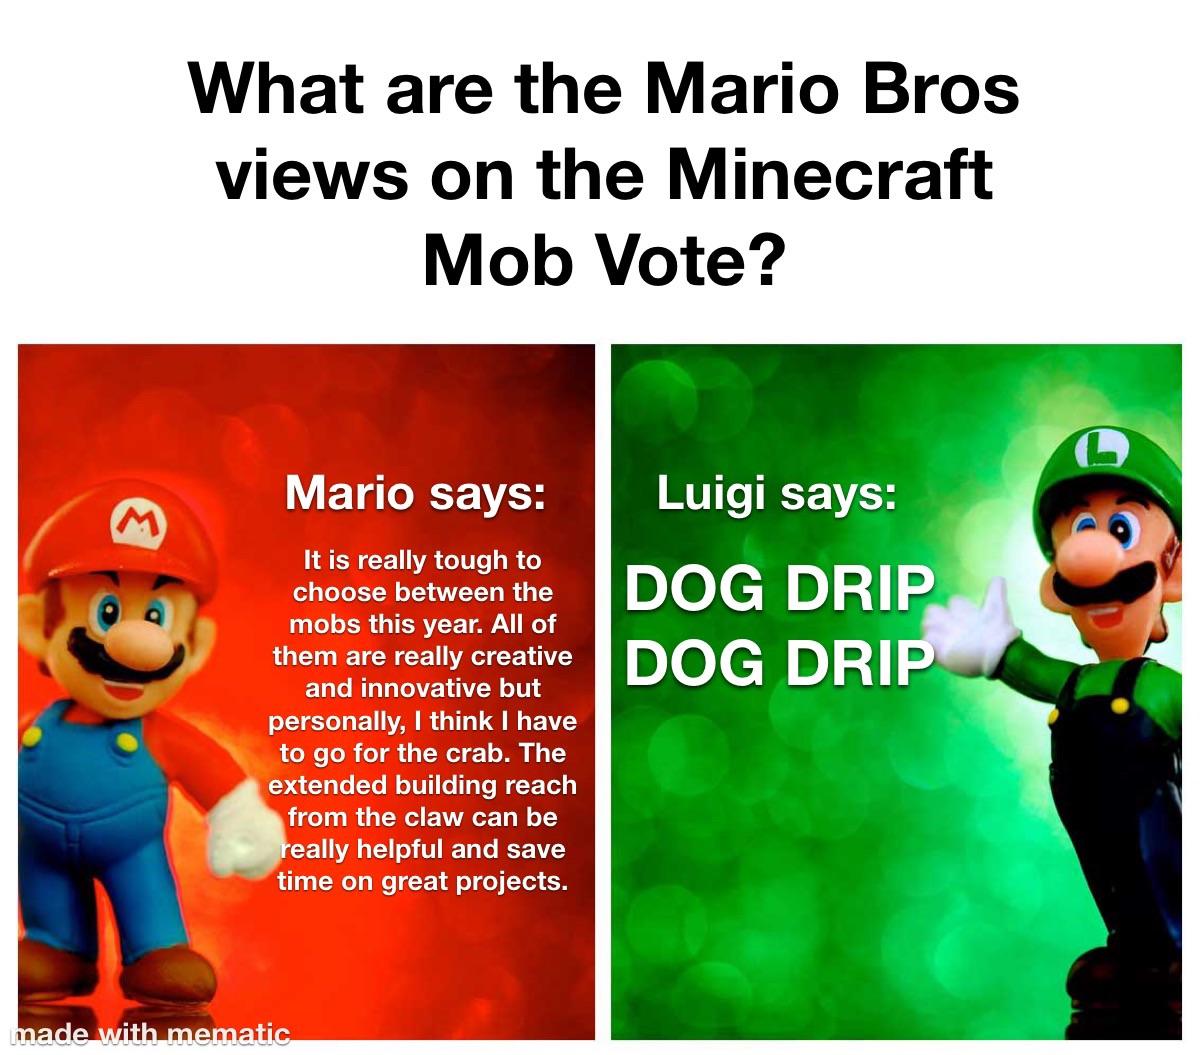 Minecraft Memes - Take a wild guess on who I’m voting for (Hint: Dog drip)